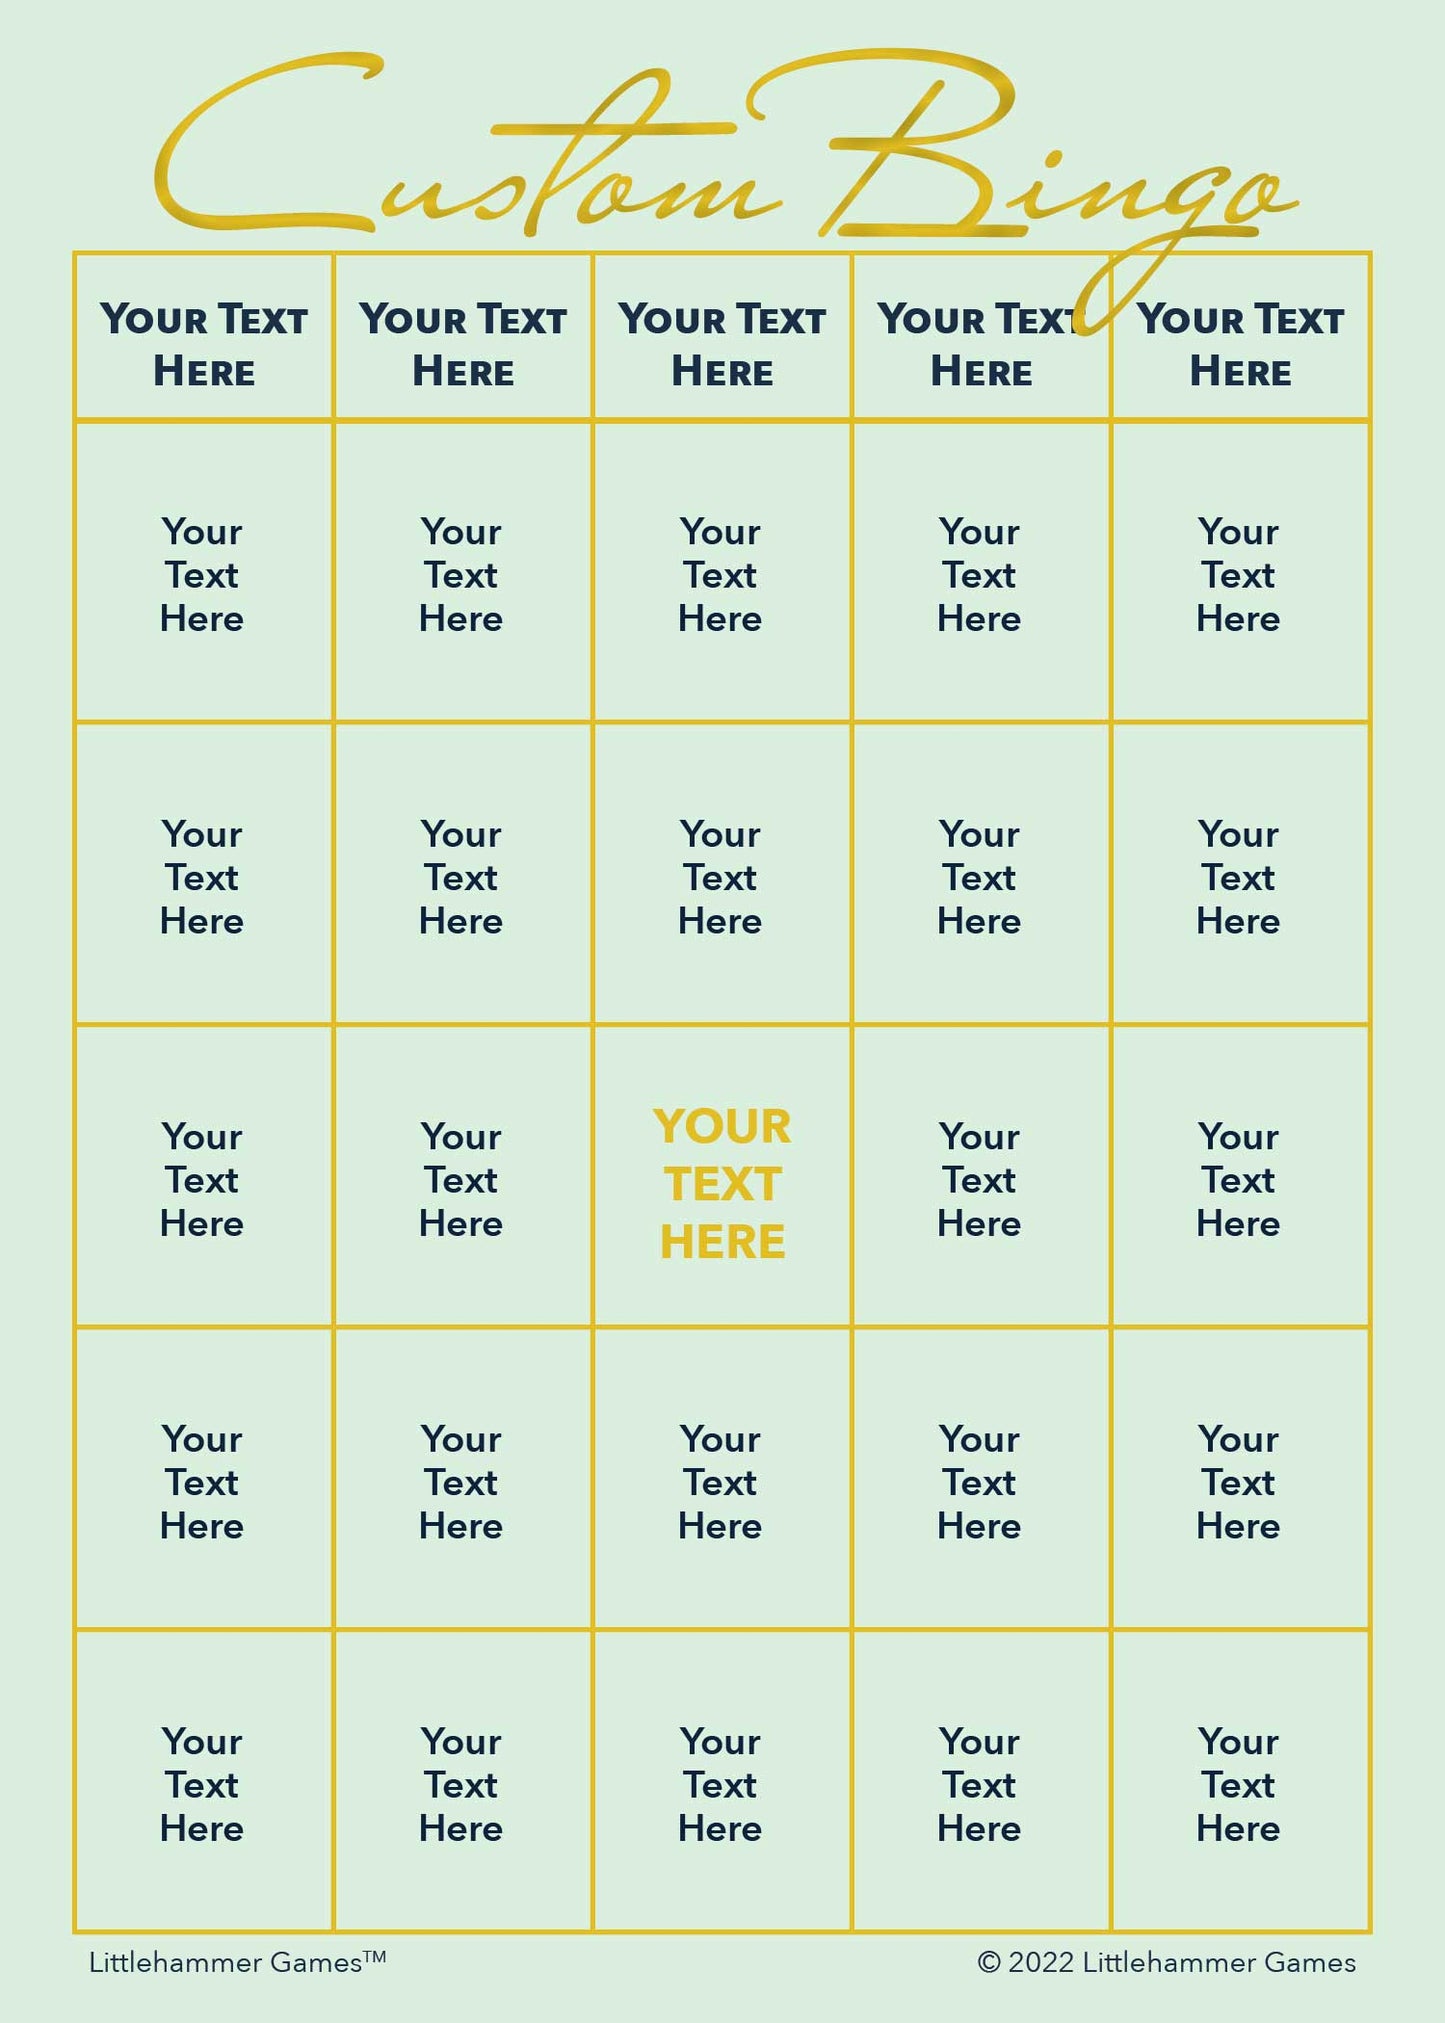 Custom Bingo game card with gold text on a mint background